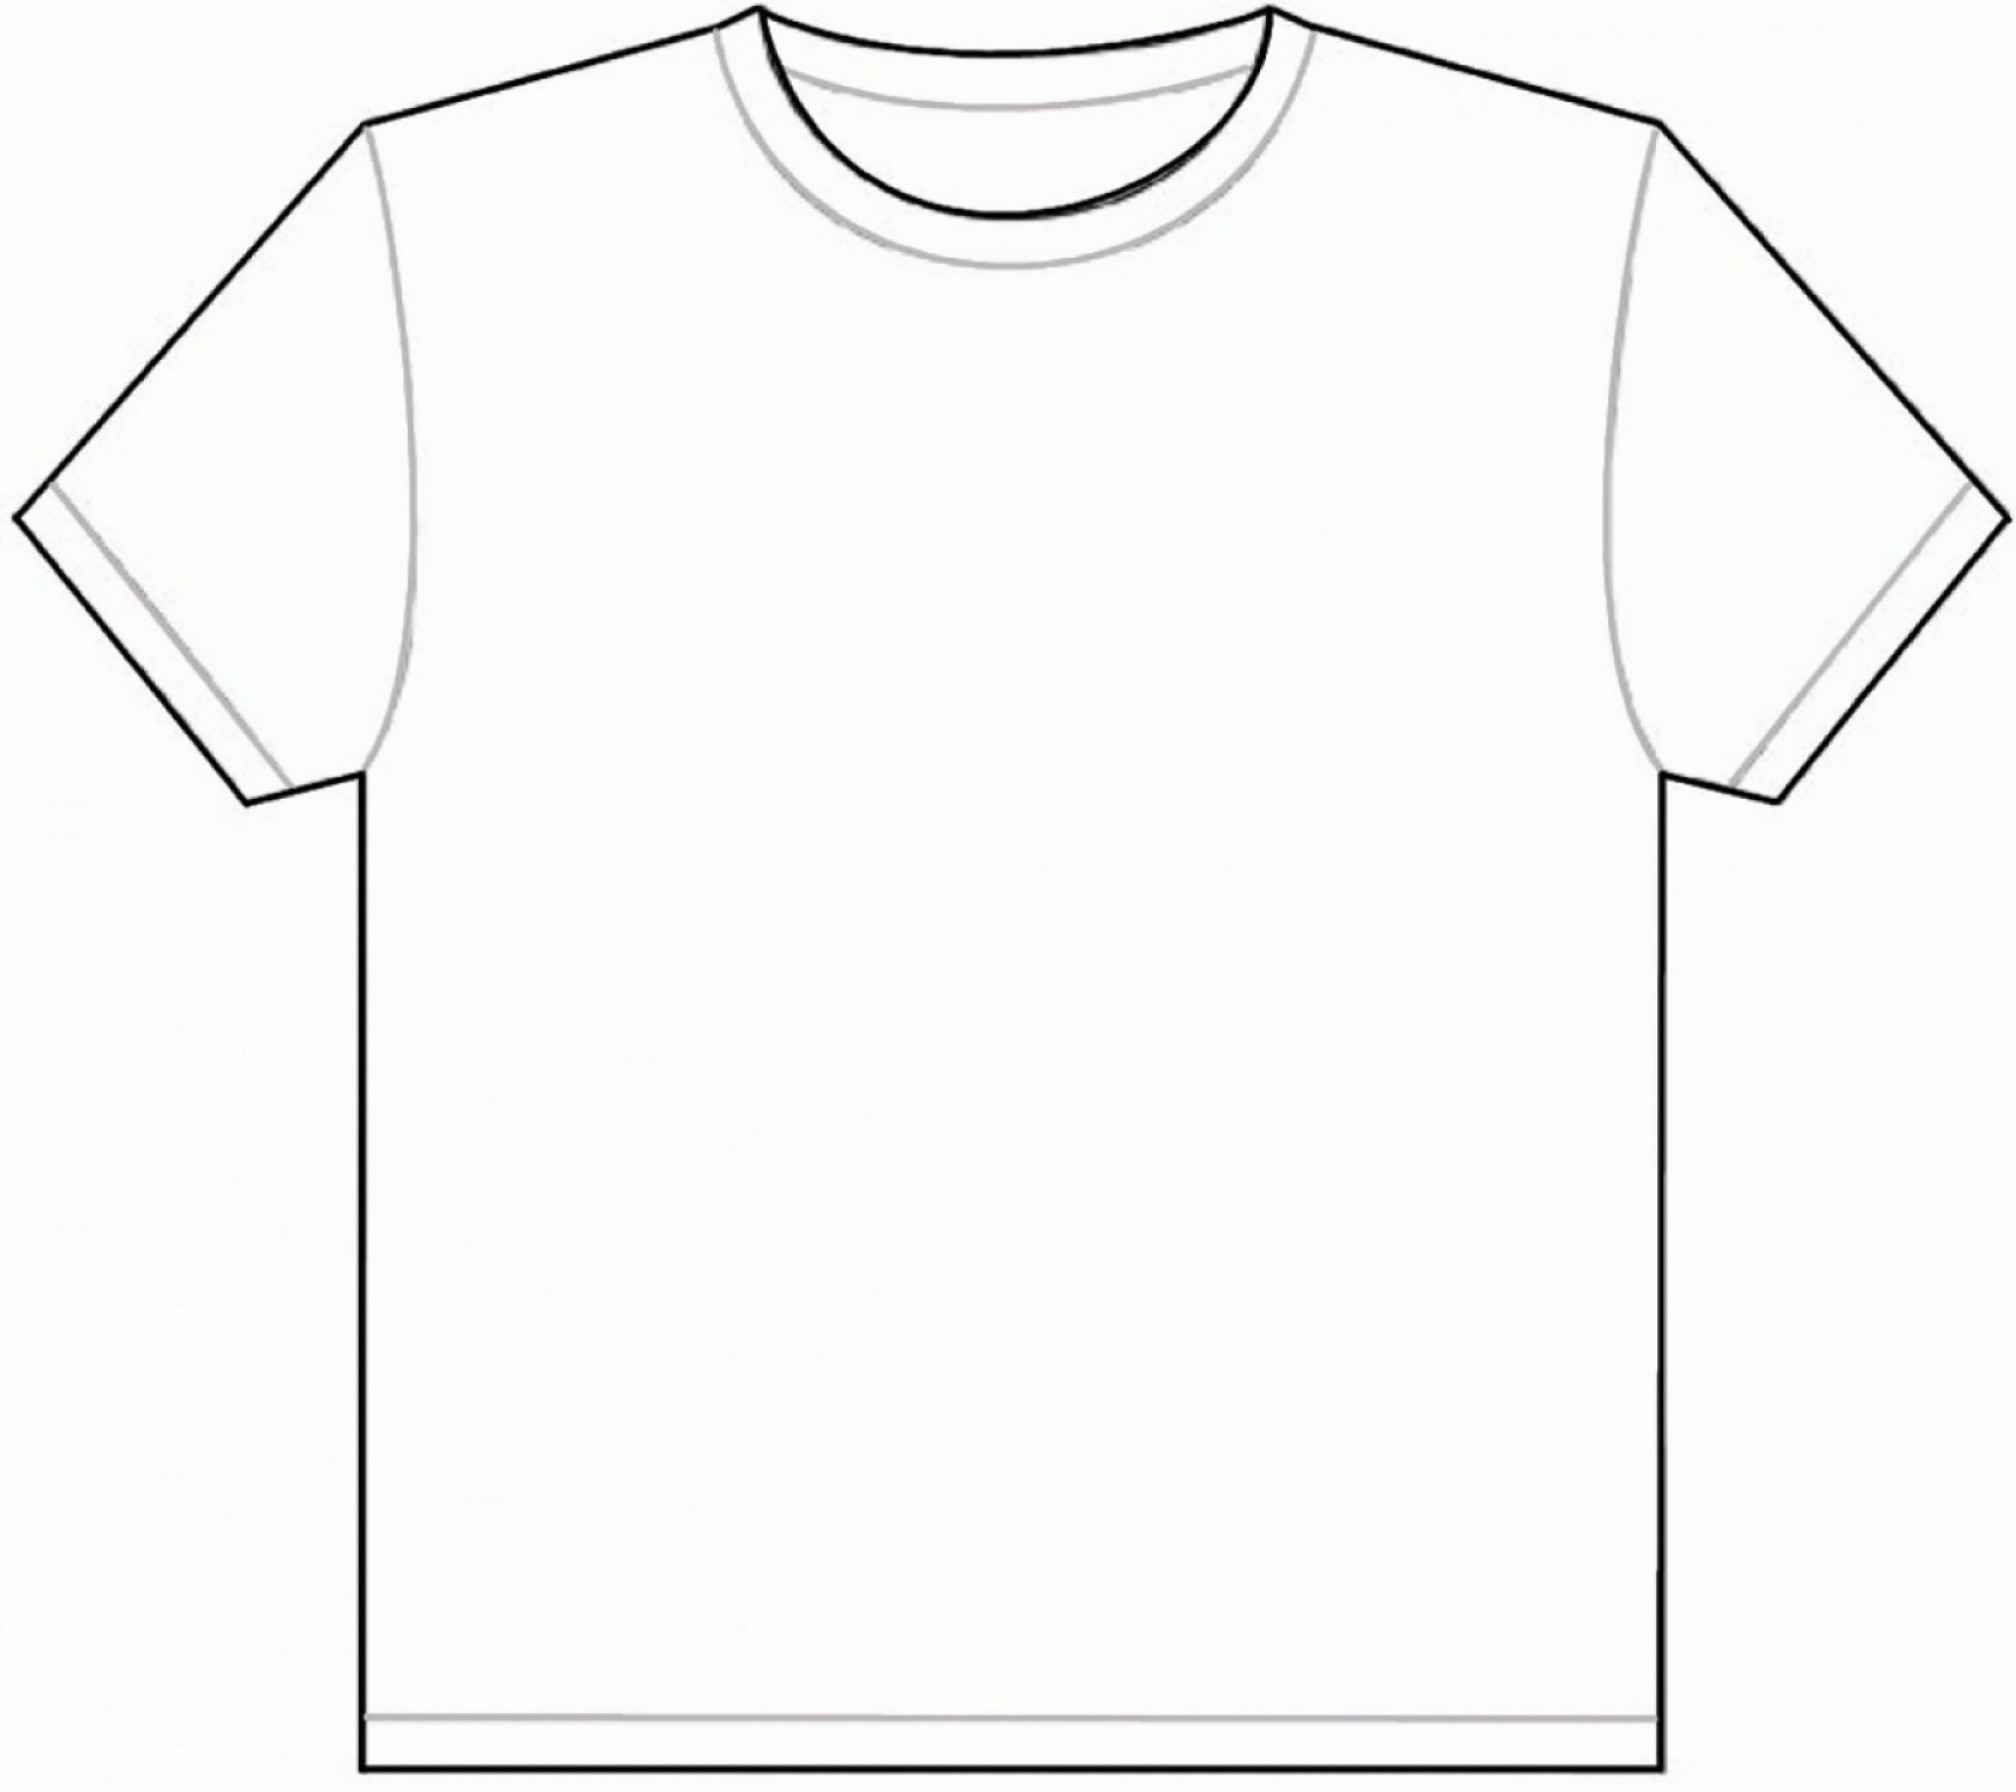 Download Blank T Shirt Vector at Vectorified.com | Collection of ...